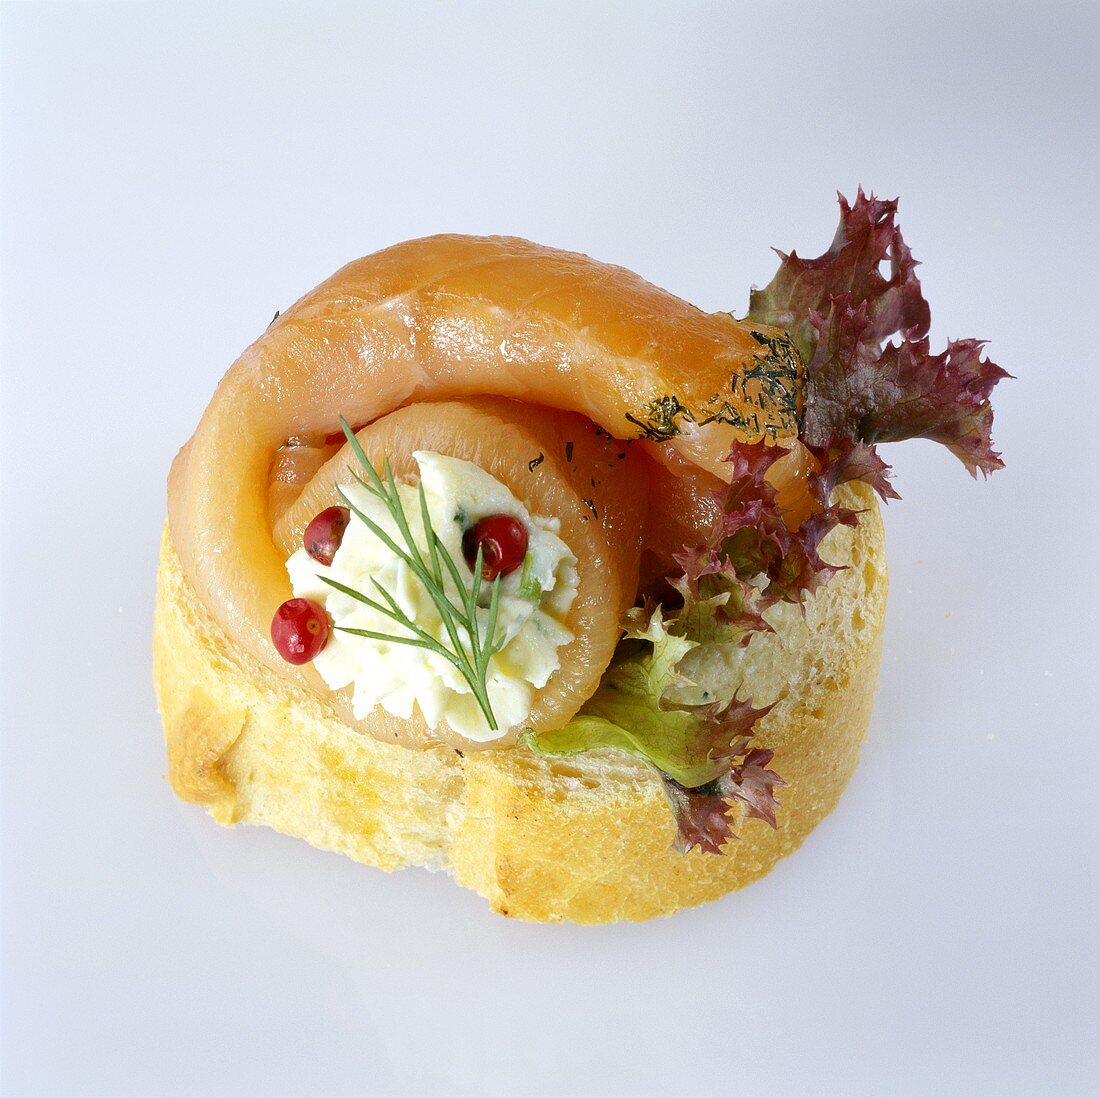 Canapé with salmon, with lettuce garnish